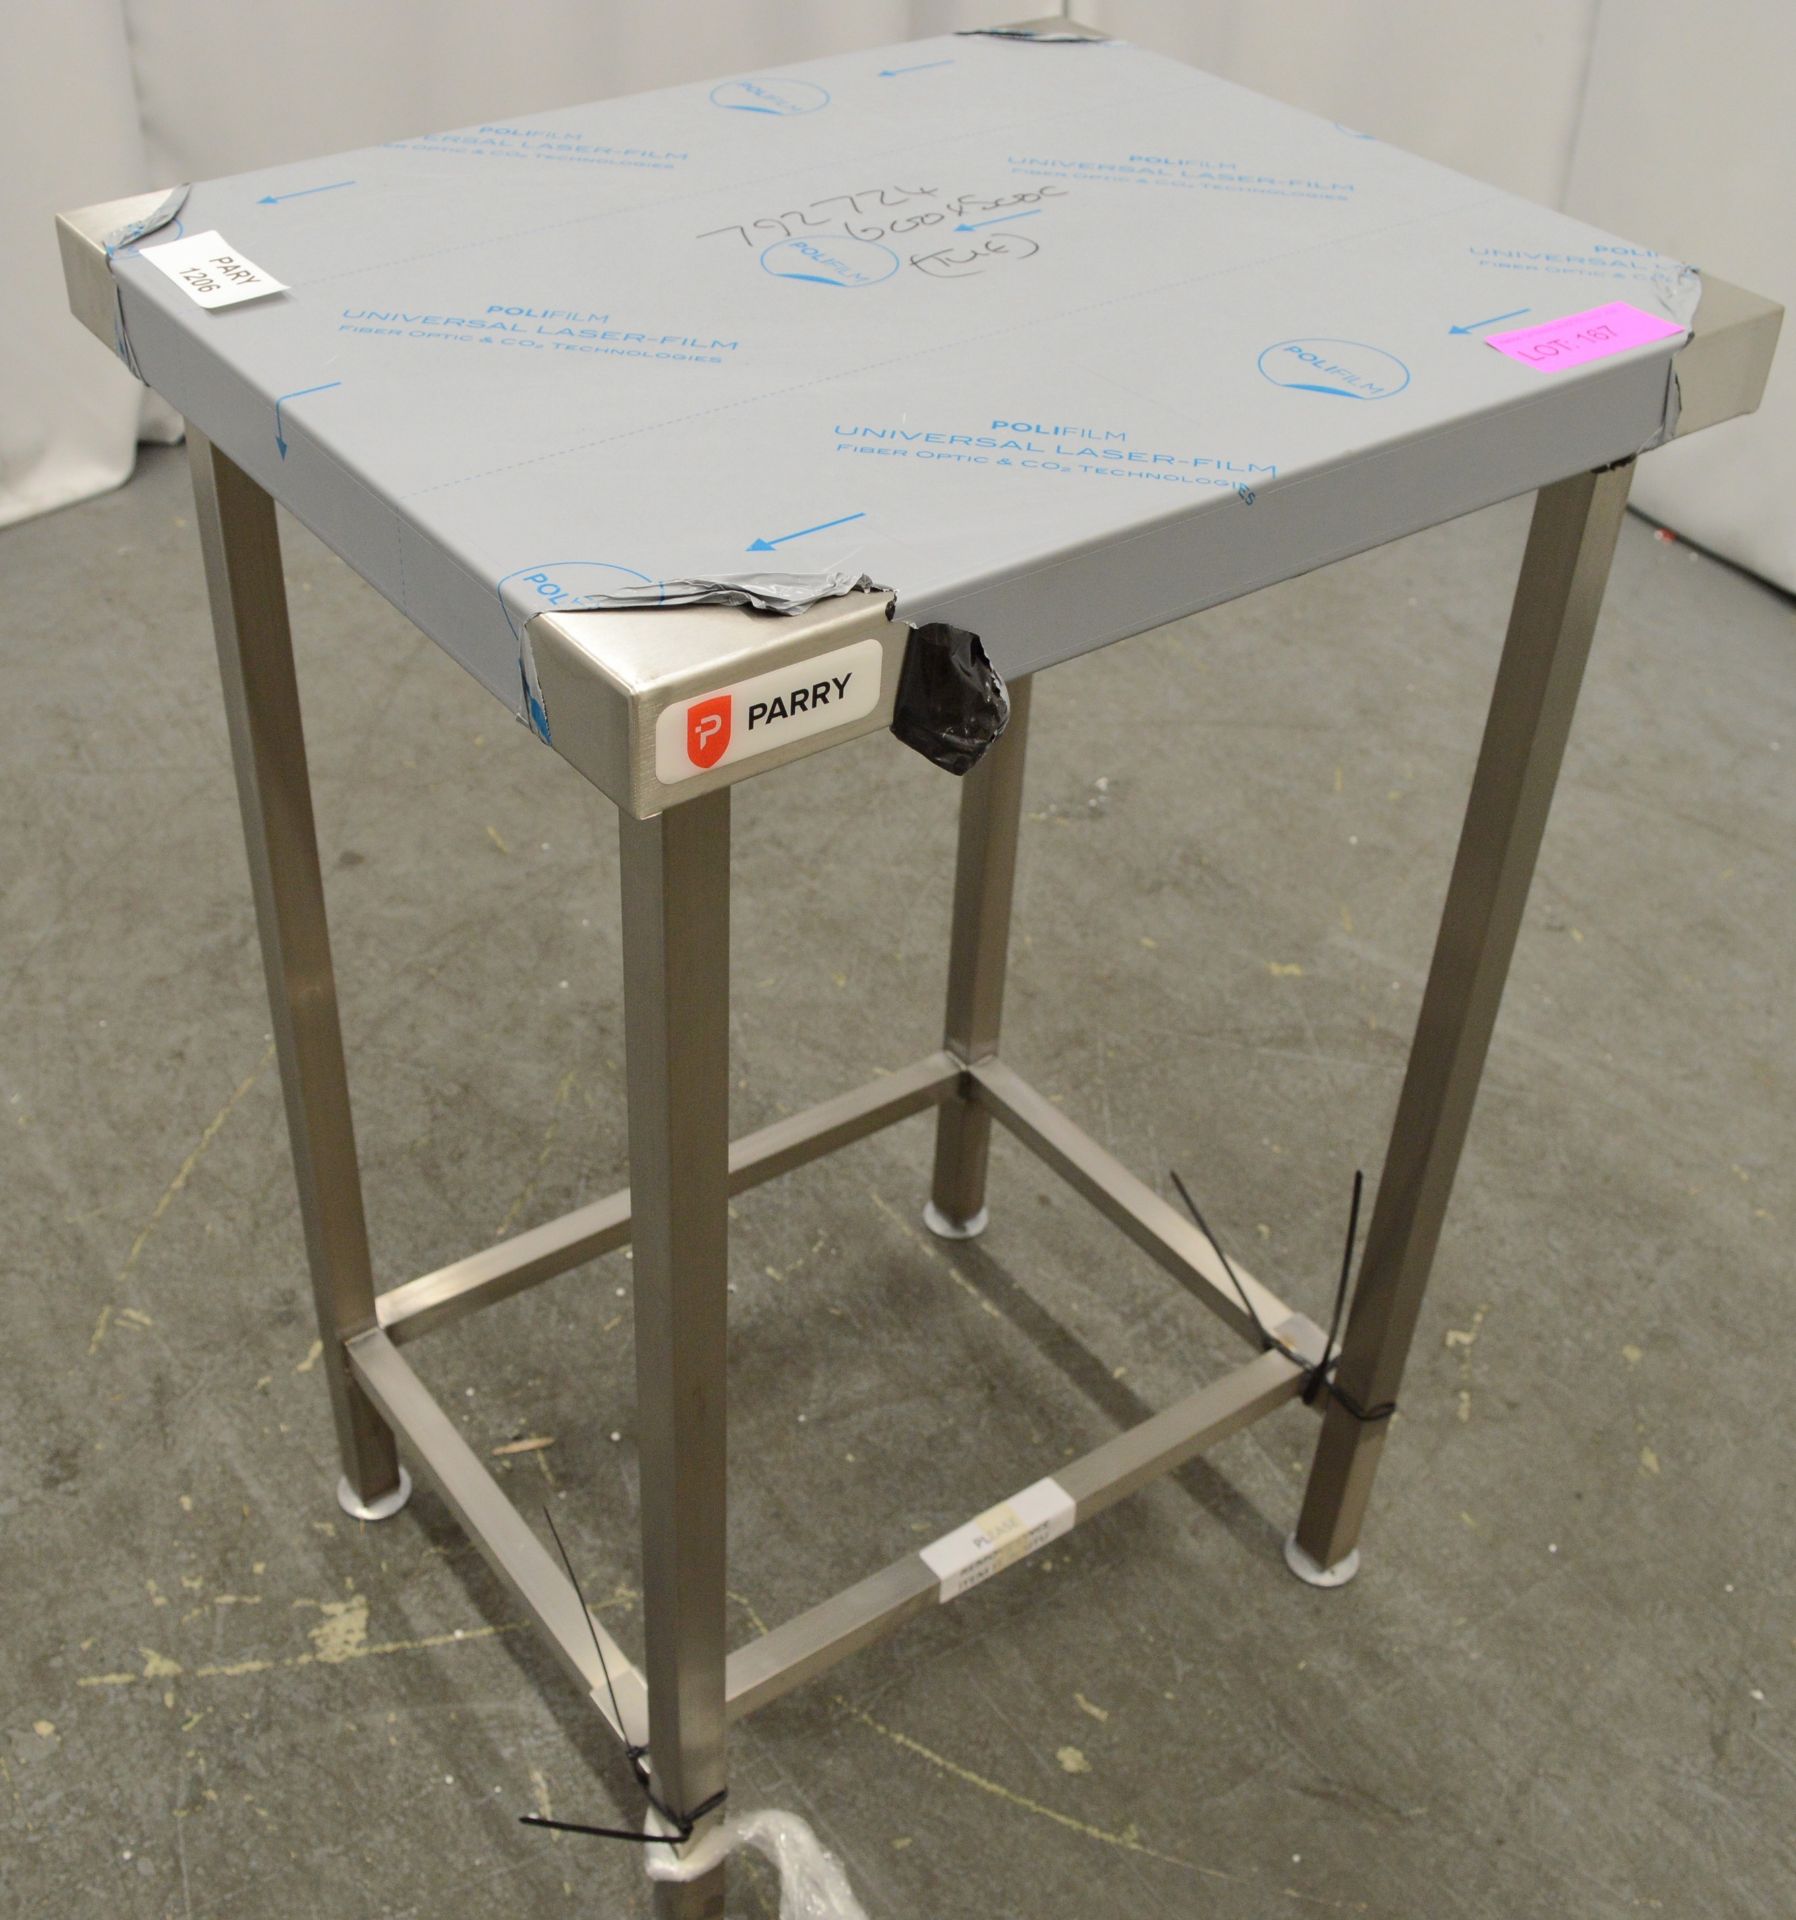 Parry stainless steel table 600x500x900mm - Image 2 of 4